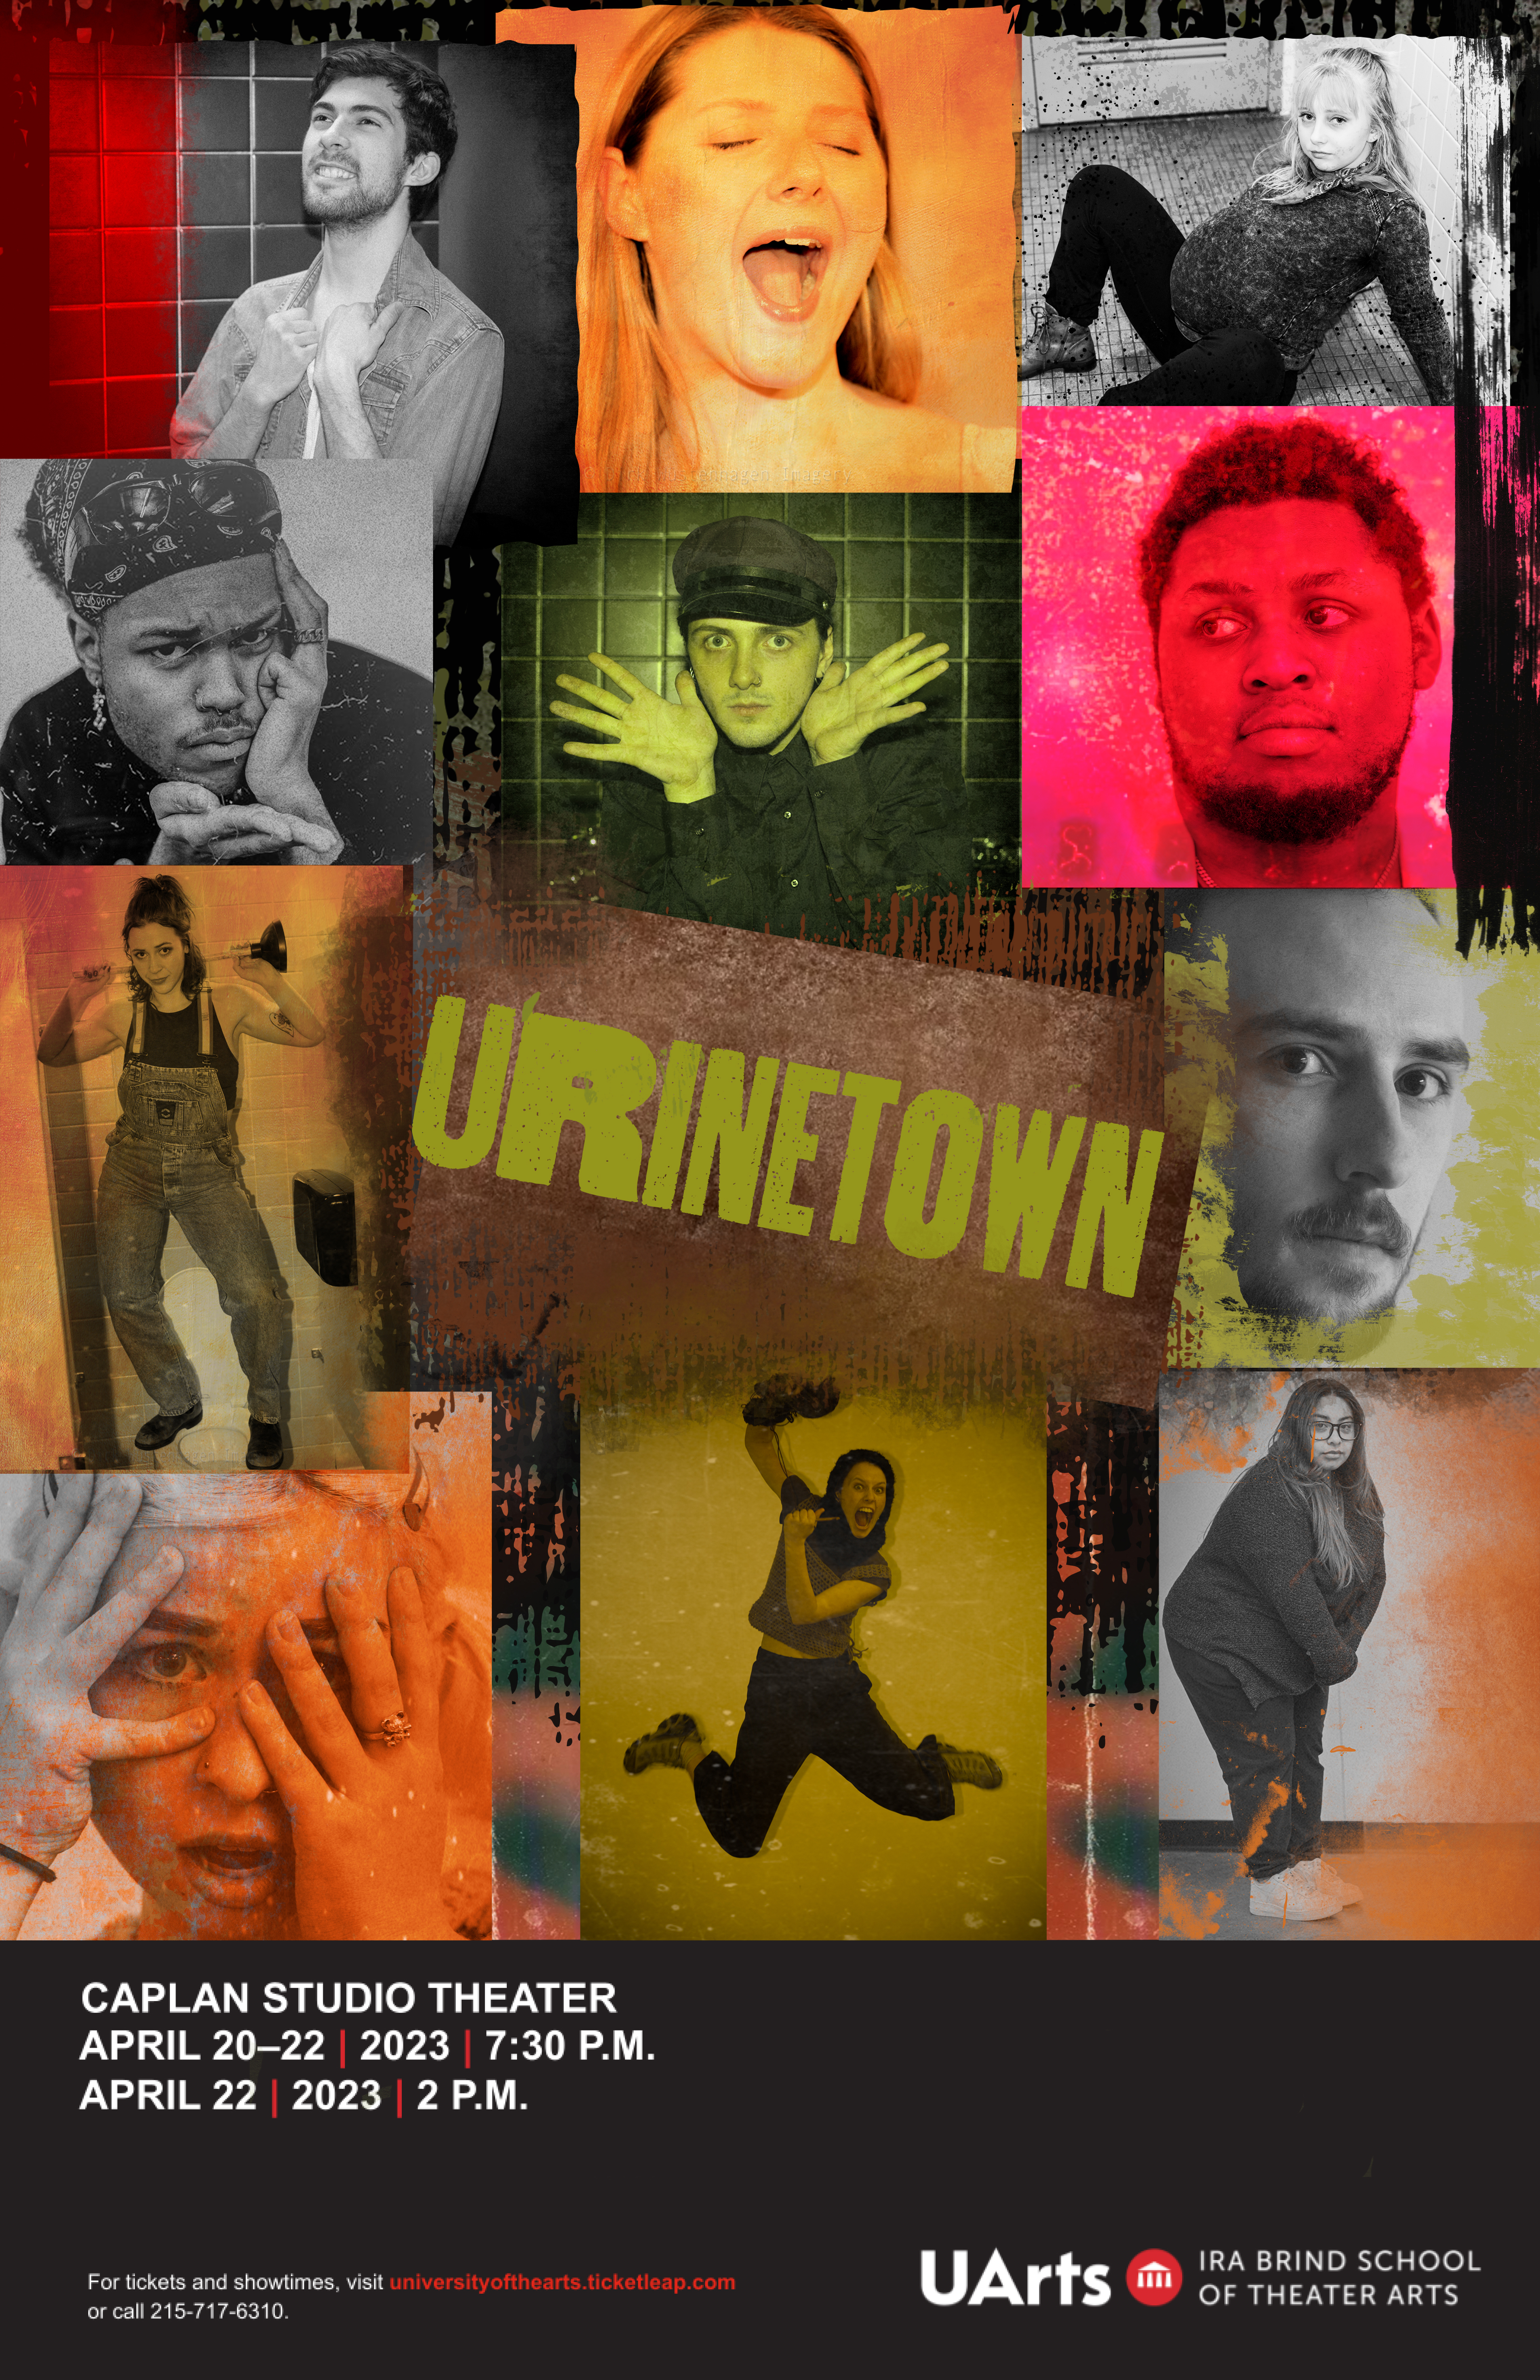 A collage of pictures of people with the images in yellow, orange, and red colors. Some pictures are close up faces, mixed in between full body pictures. The middle of the page reads "Urinetown" in a green-toned color. The bottom reads "Caplan Studio Theater April 20–22, 2023 7:30 P.M., April 22, 2023 2 P.M." 